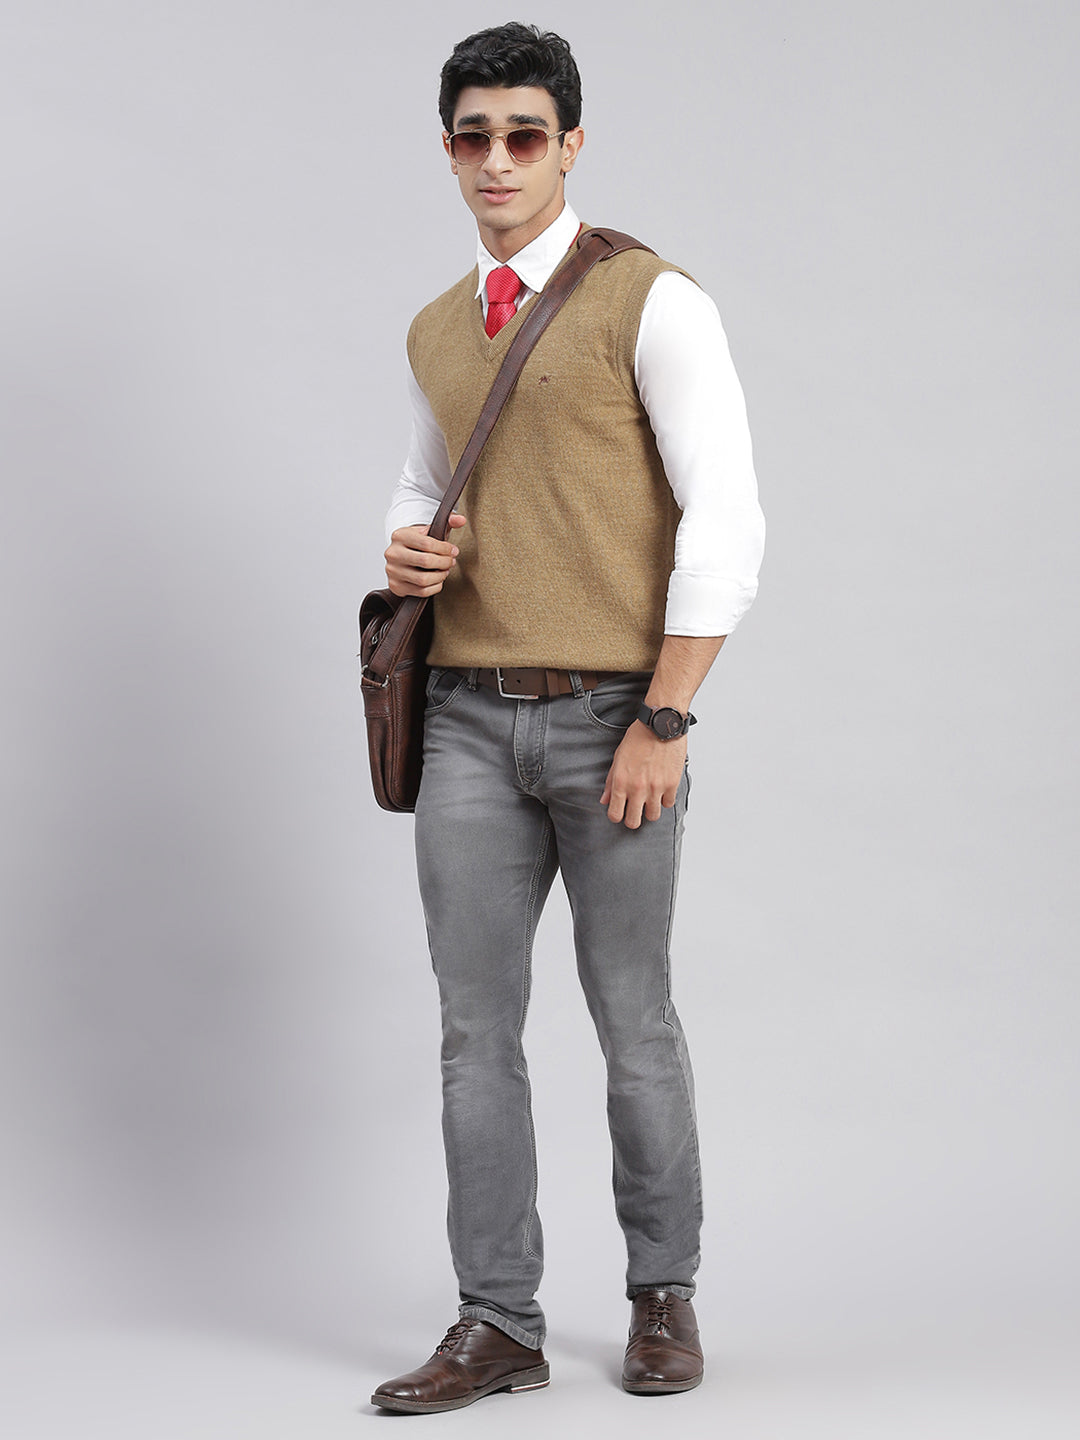 Men Brown Solid V Neck Sleeveless Sweaters/Pullovers